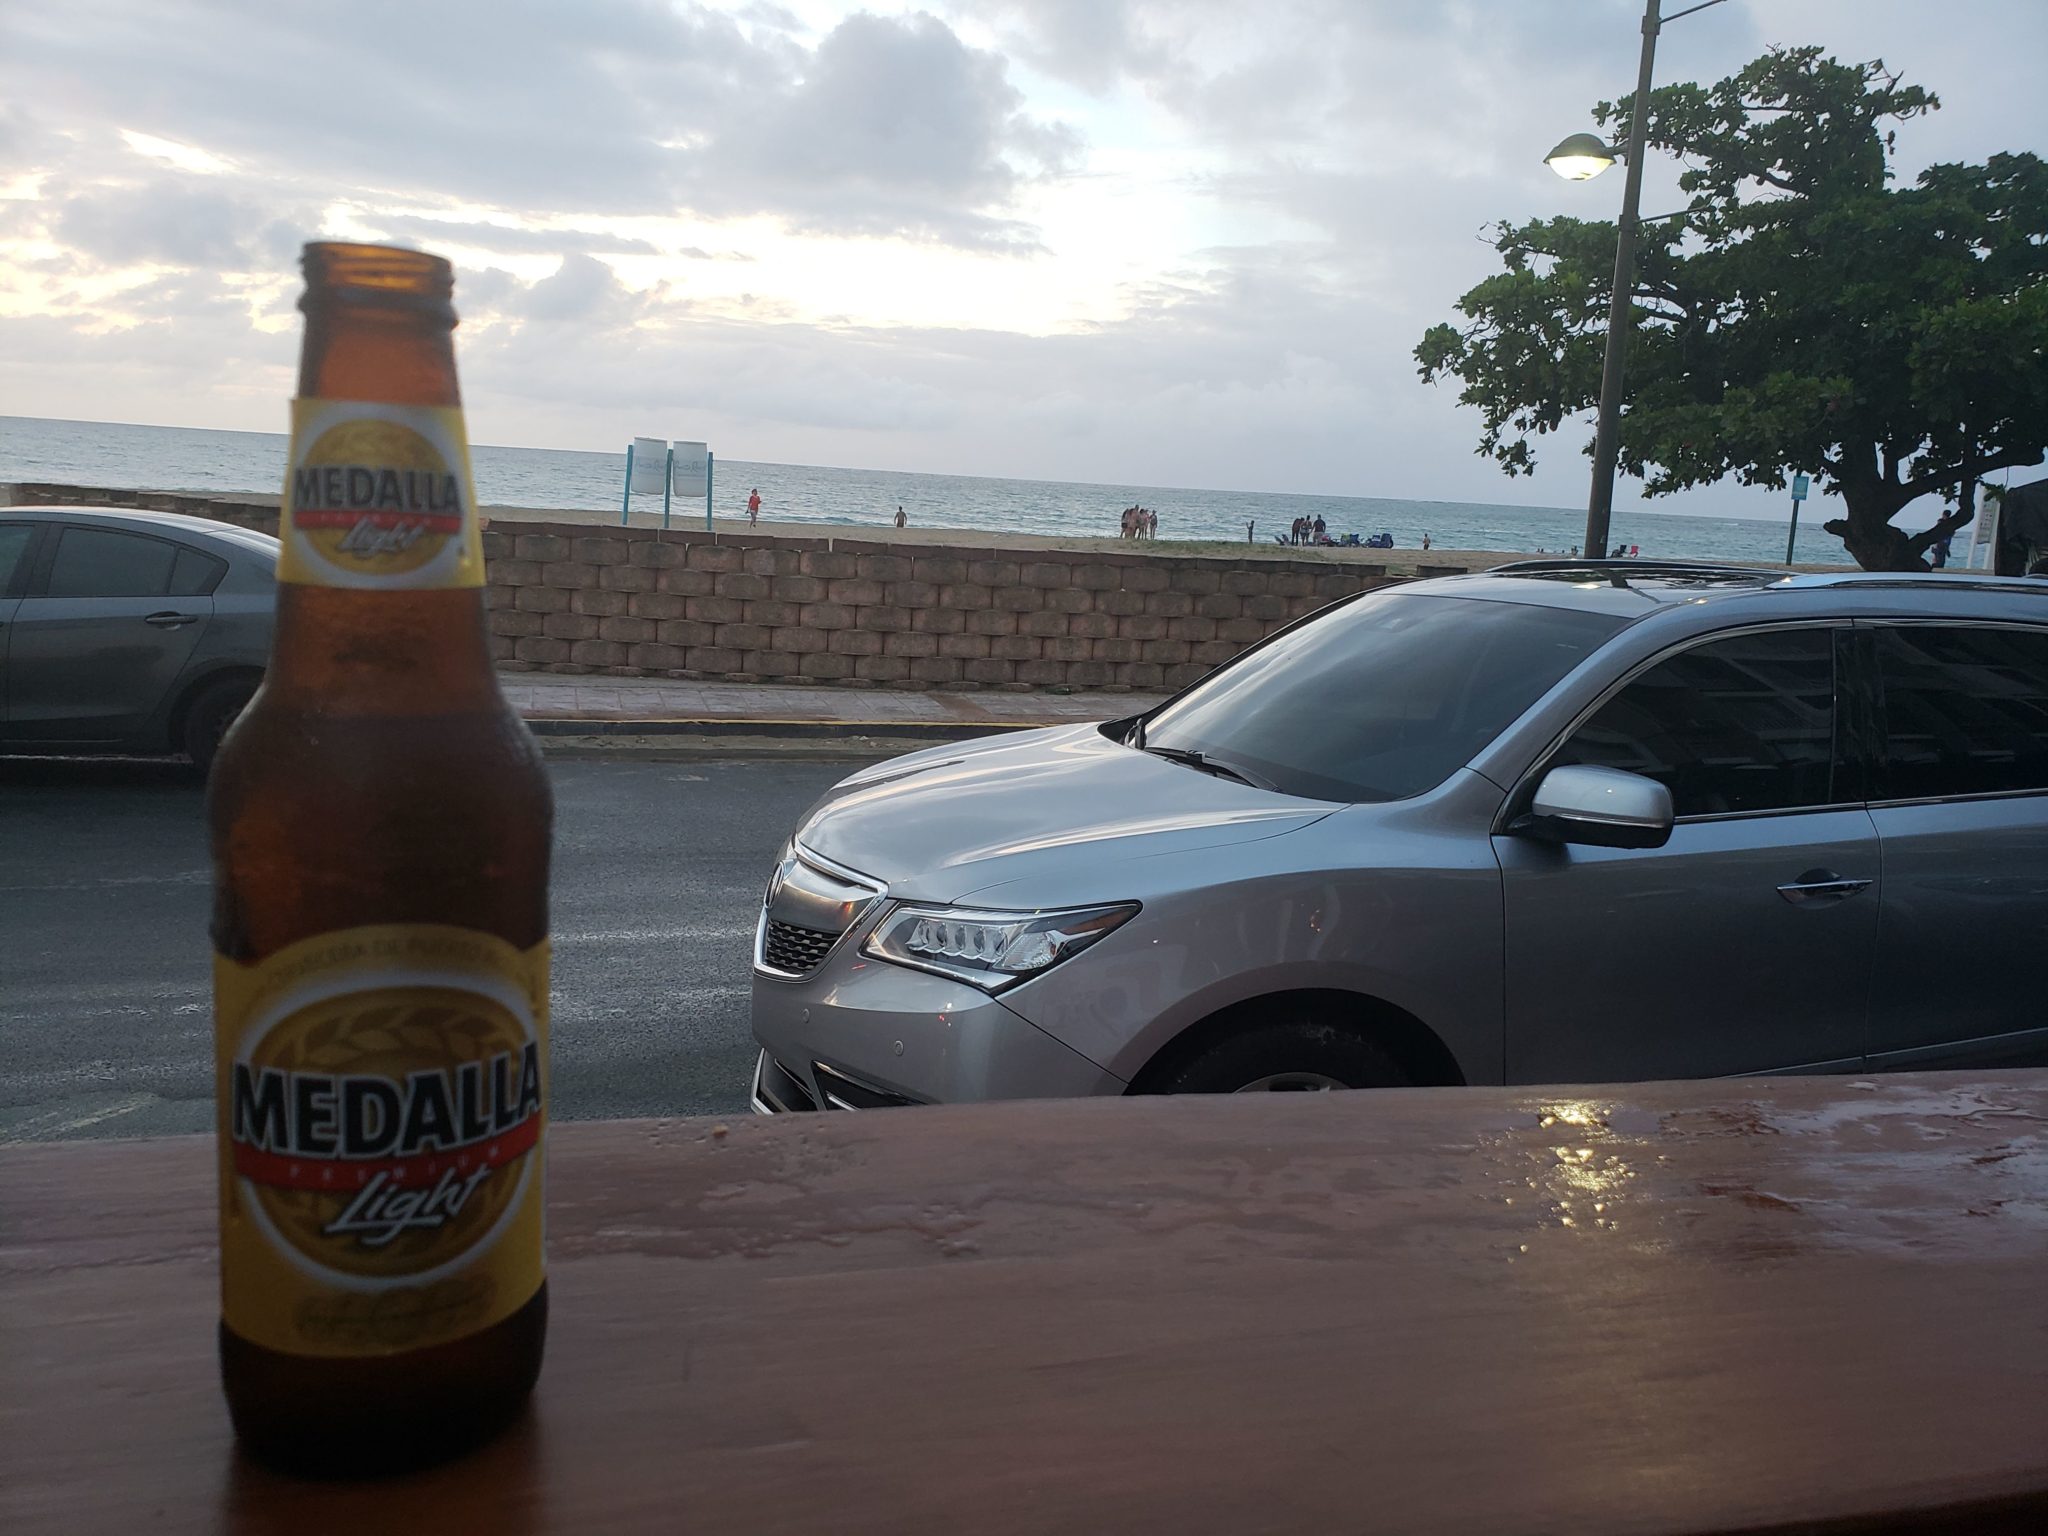 a beer bottle and a car on a table